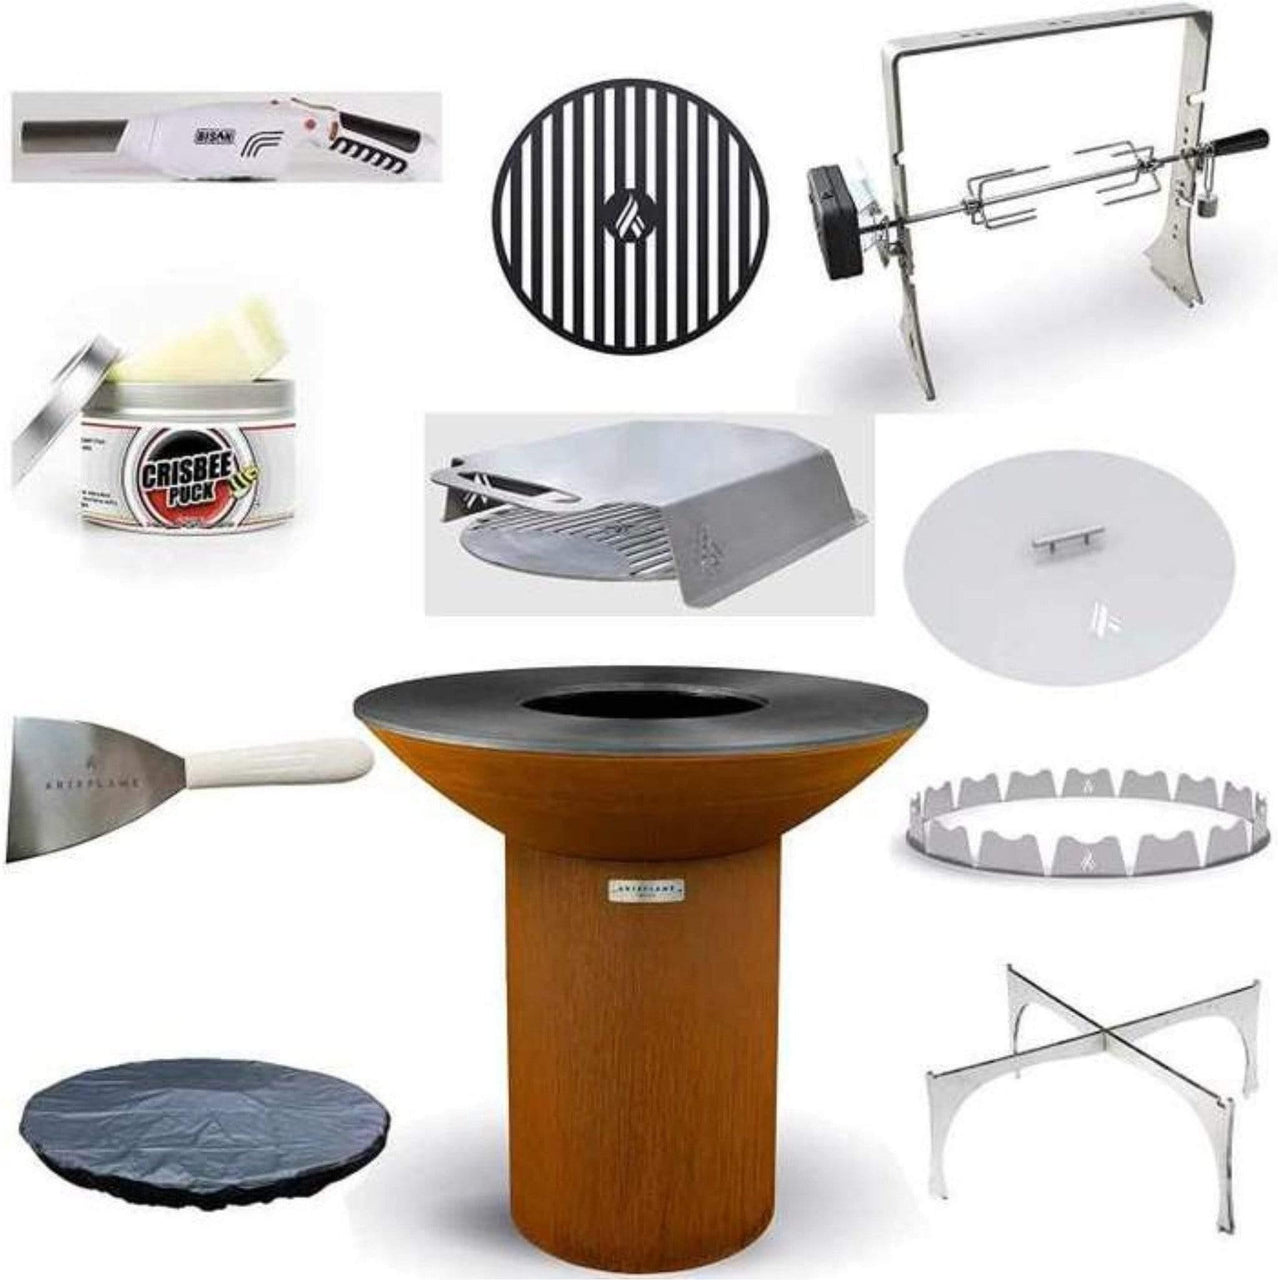 Arteflame Classic 40" Grill - High Round Base Bundle with 10 Grilling Accessories - Fire Pit Stock